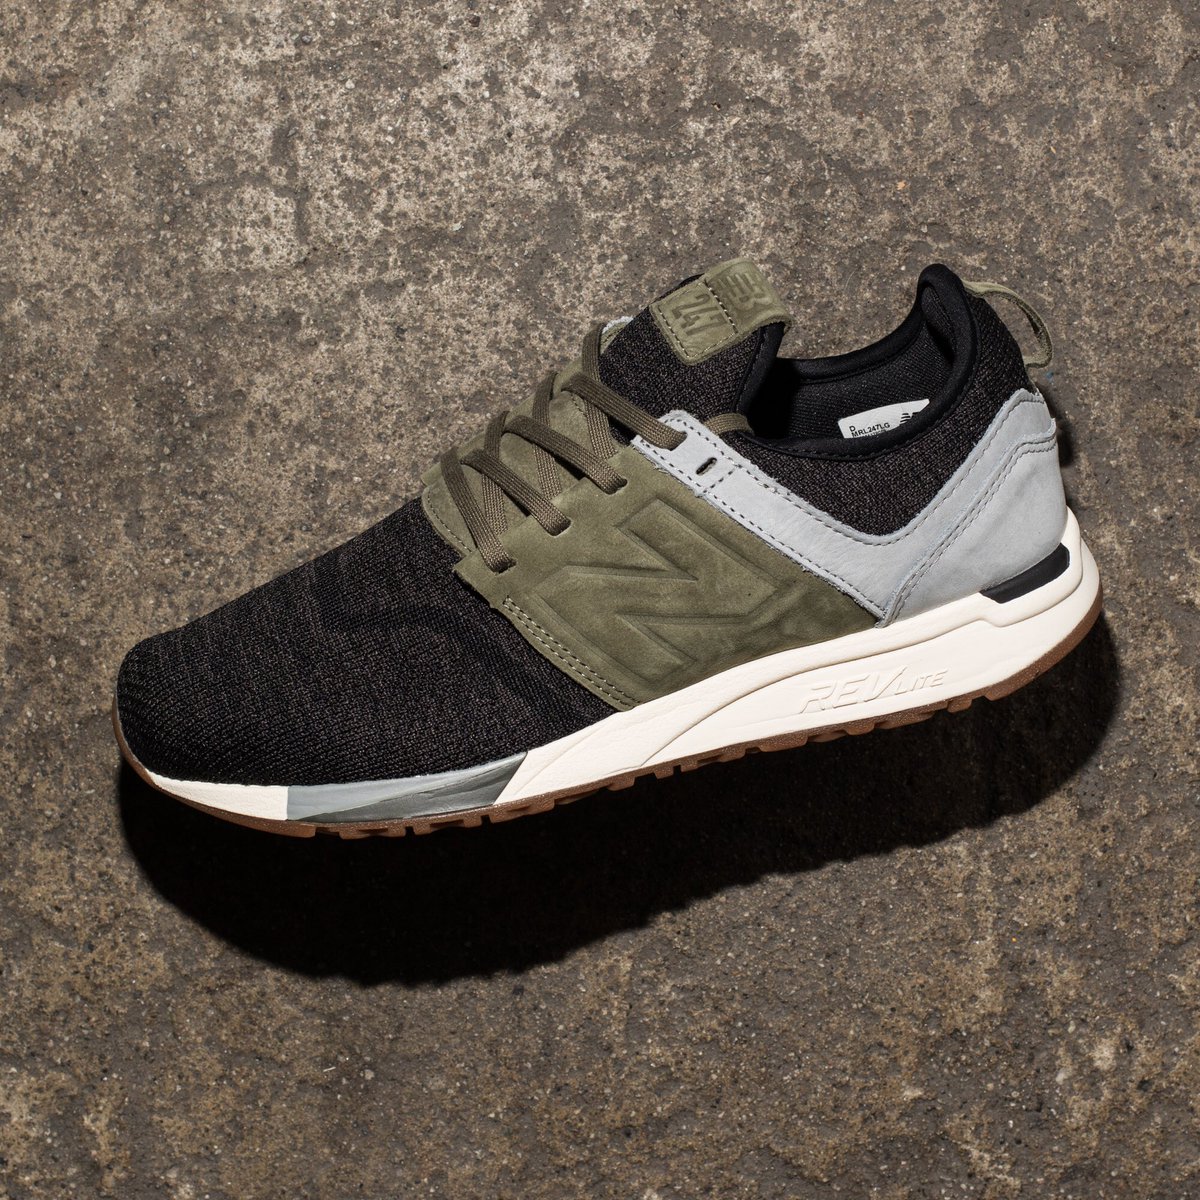 UNDEFEATED on Twitter: "New Balance 247 "Black/Olive" // Available now at  Select Undefeated Chapter Stores and https://t.co/rPhV7ZP2Fc  https://t.co/3rQDuPgShu" / Twitter